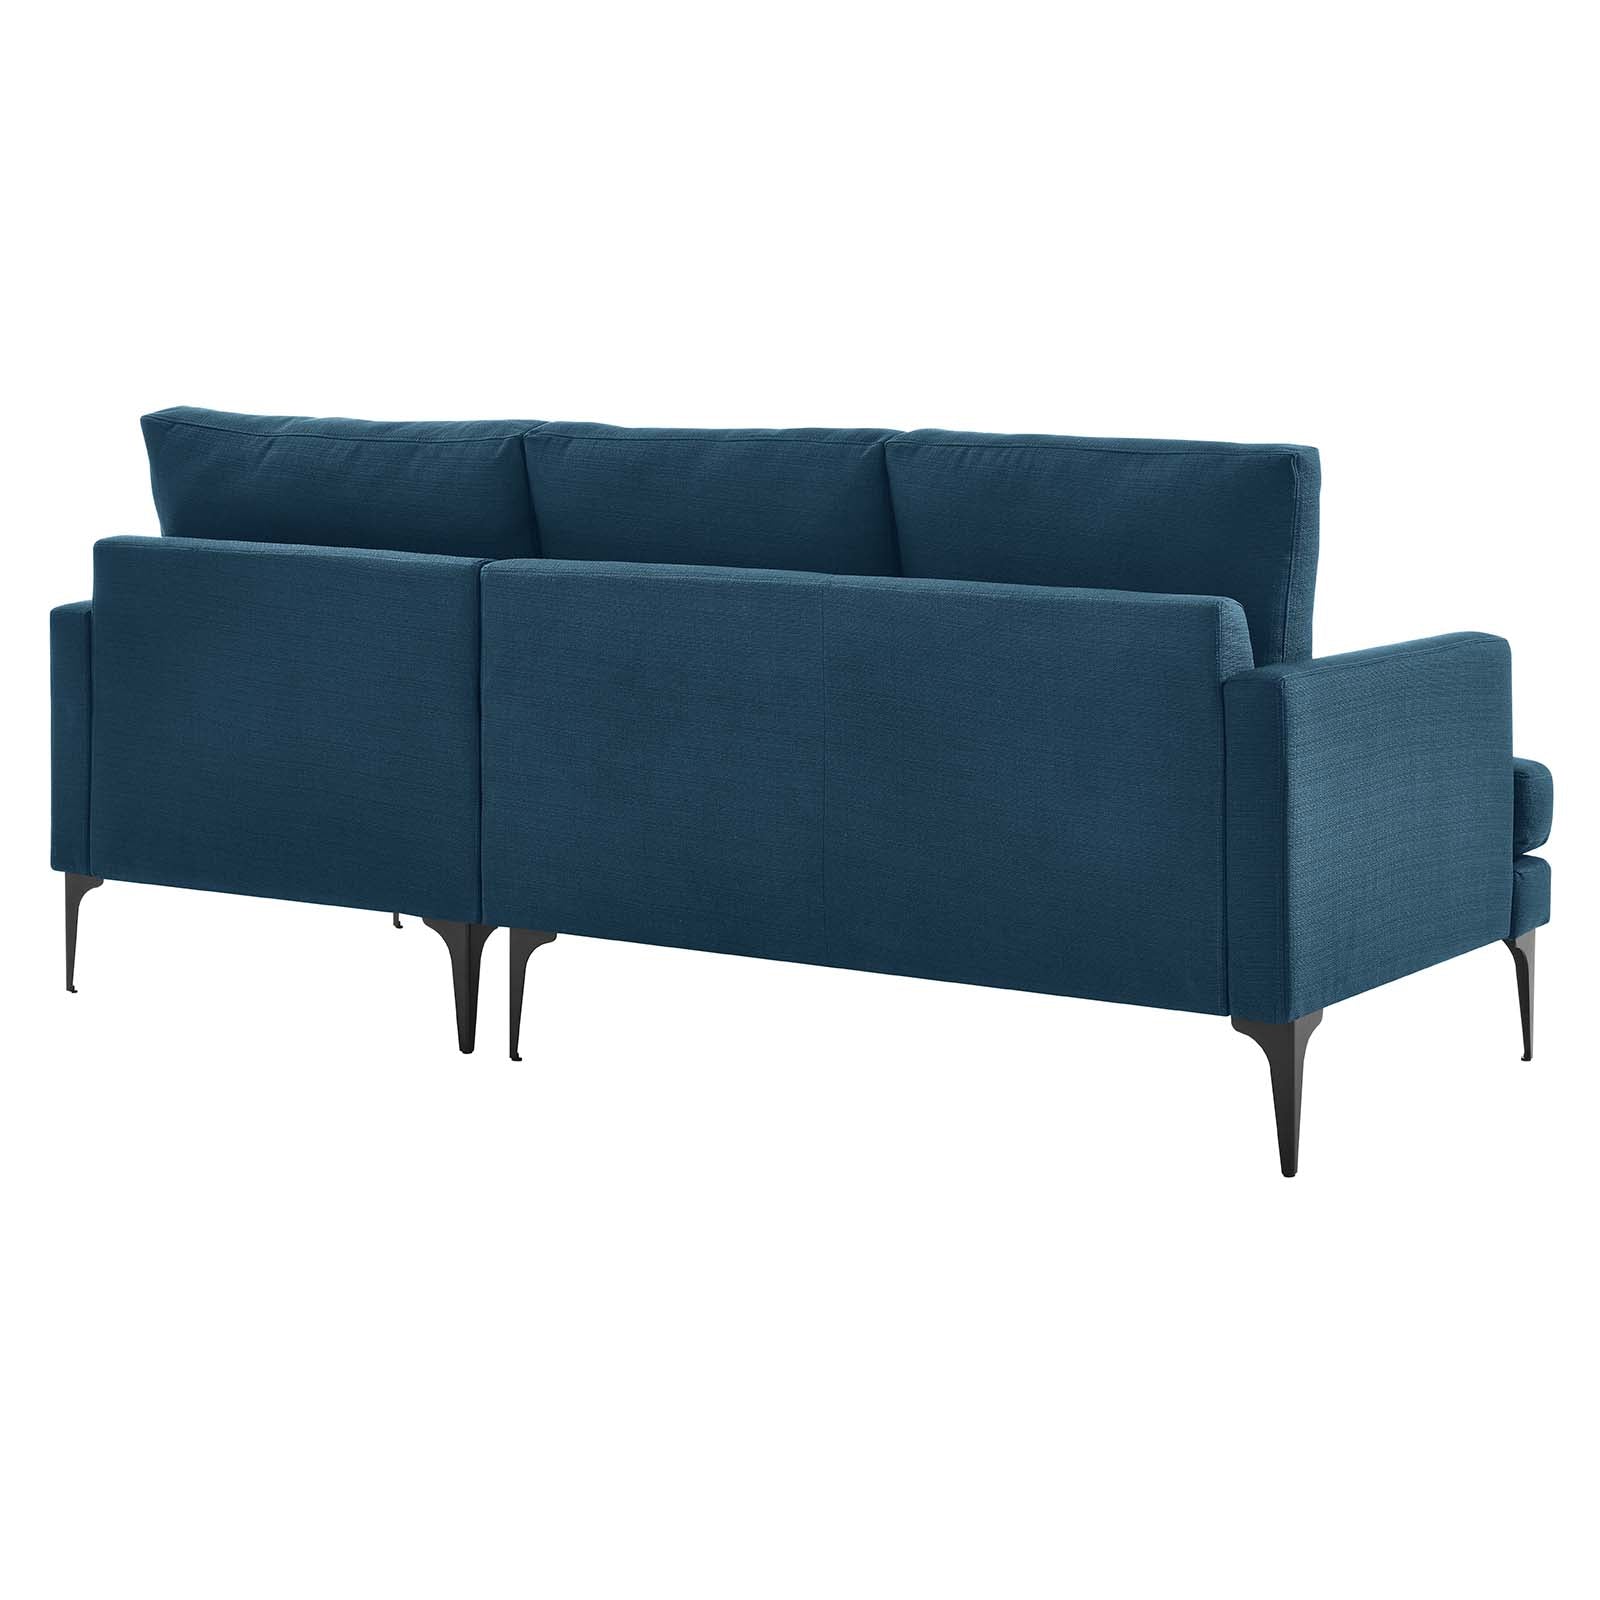 Evermore Right-Facing Upholstered Fabric Sectional Sofa